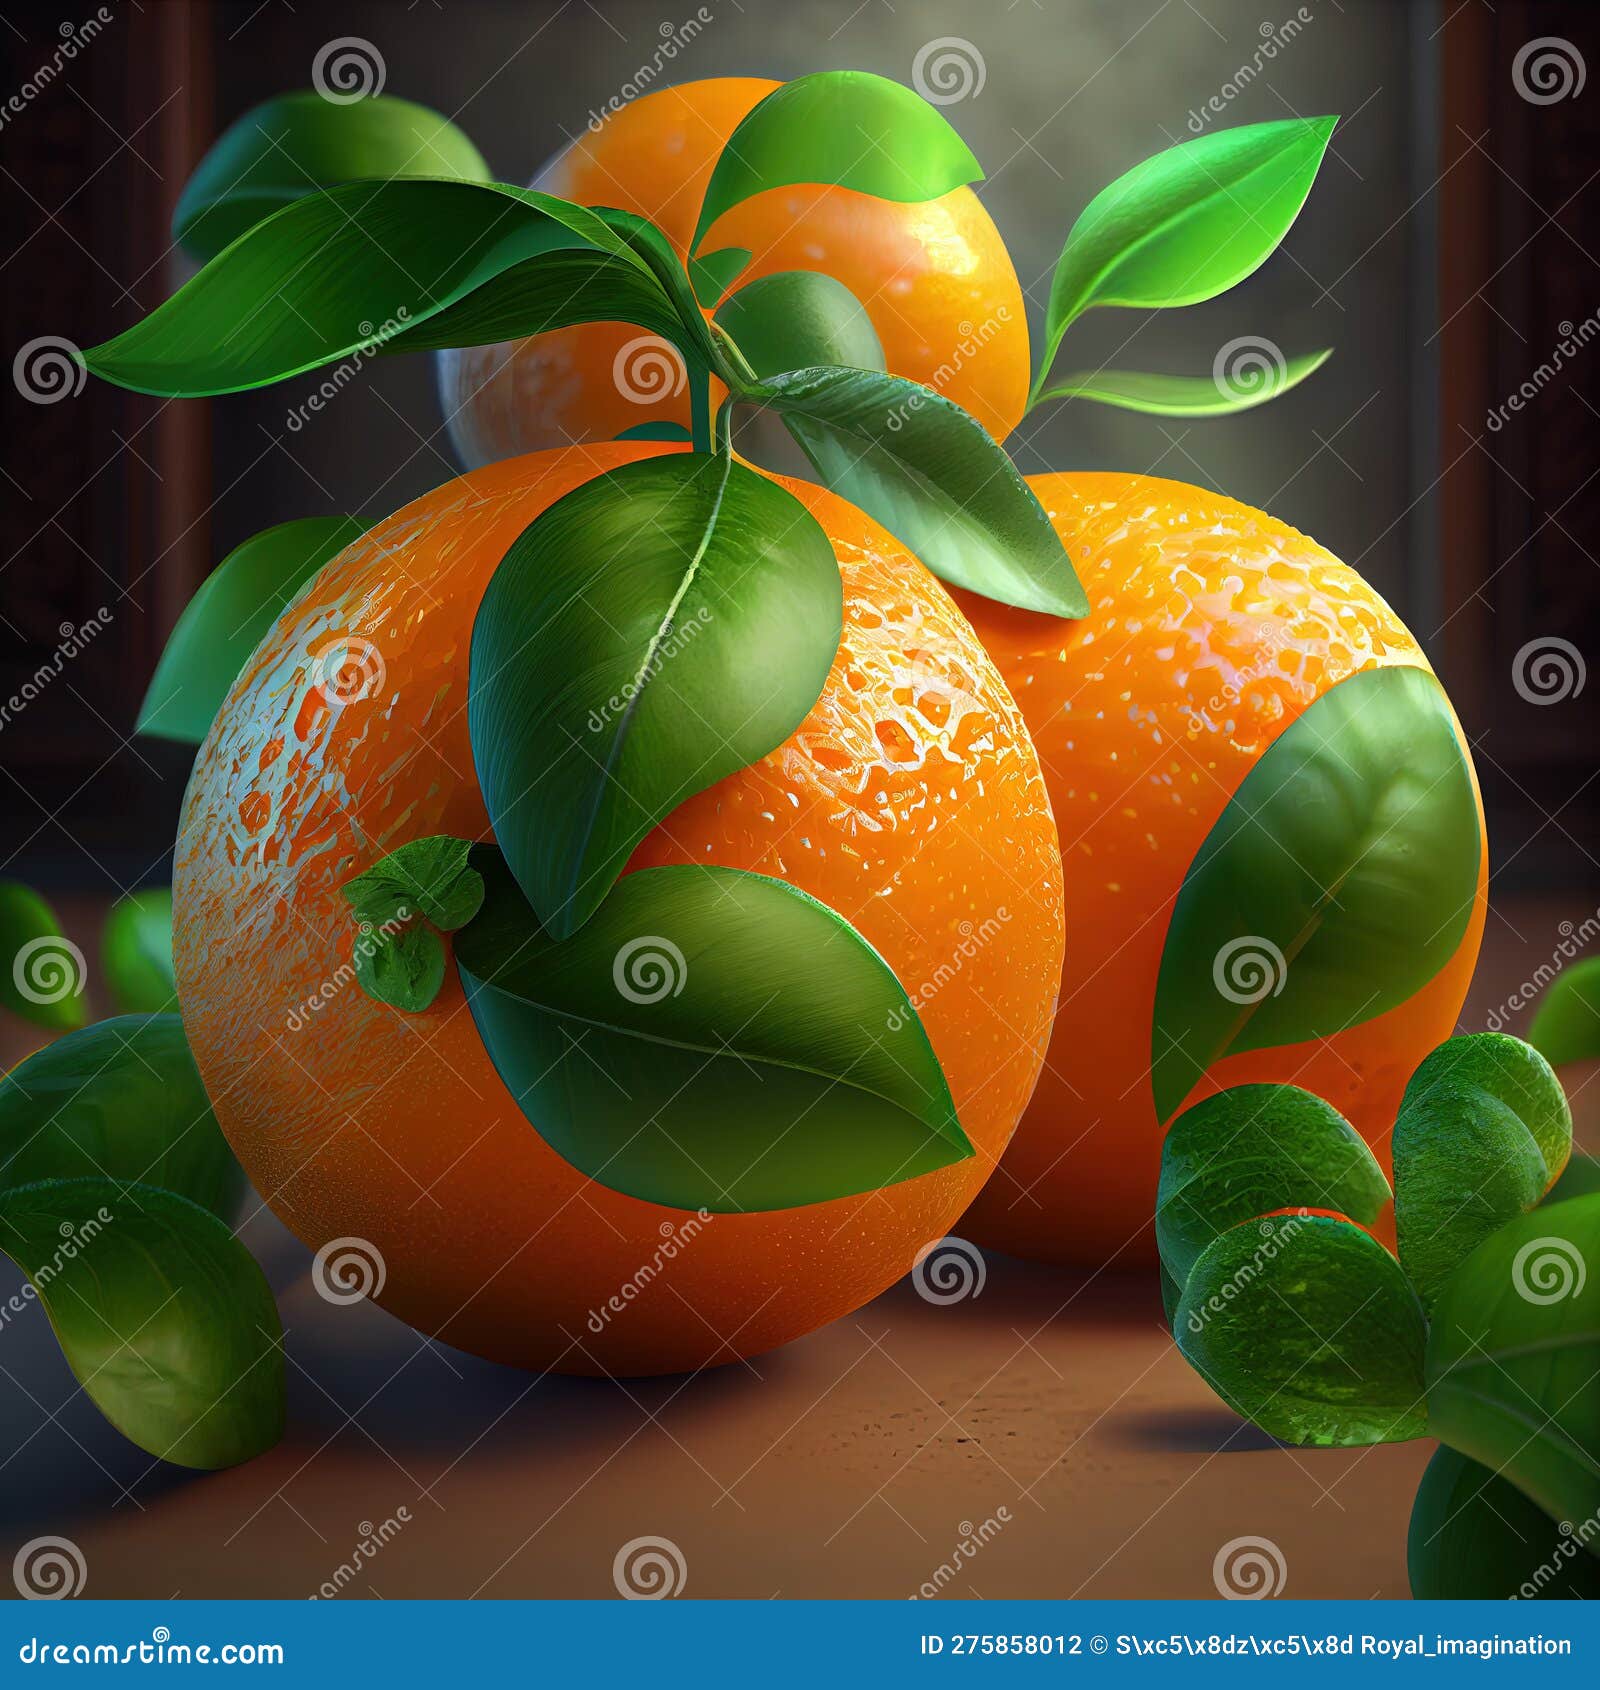 ripe oranges freshly cut from their feet on the table - generate artificial intelligence- ai